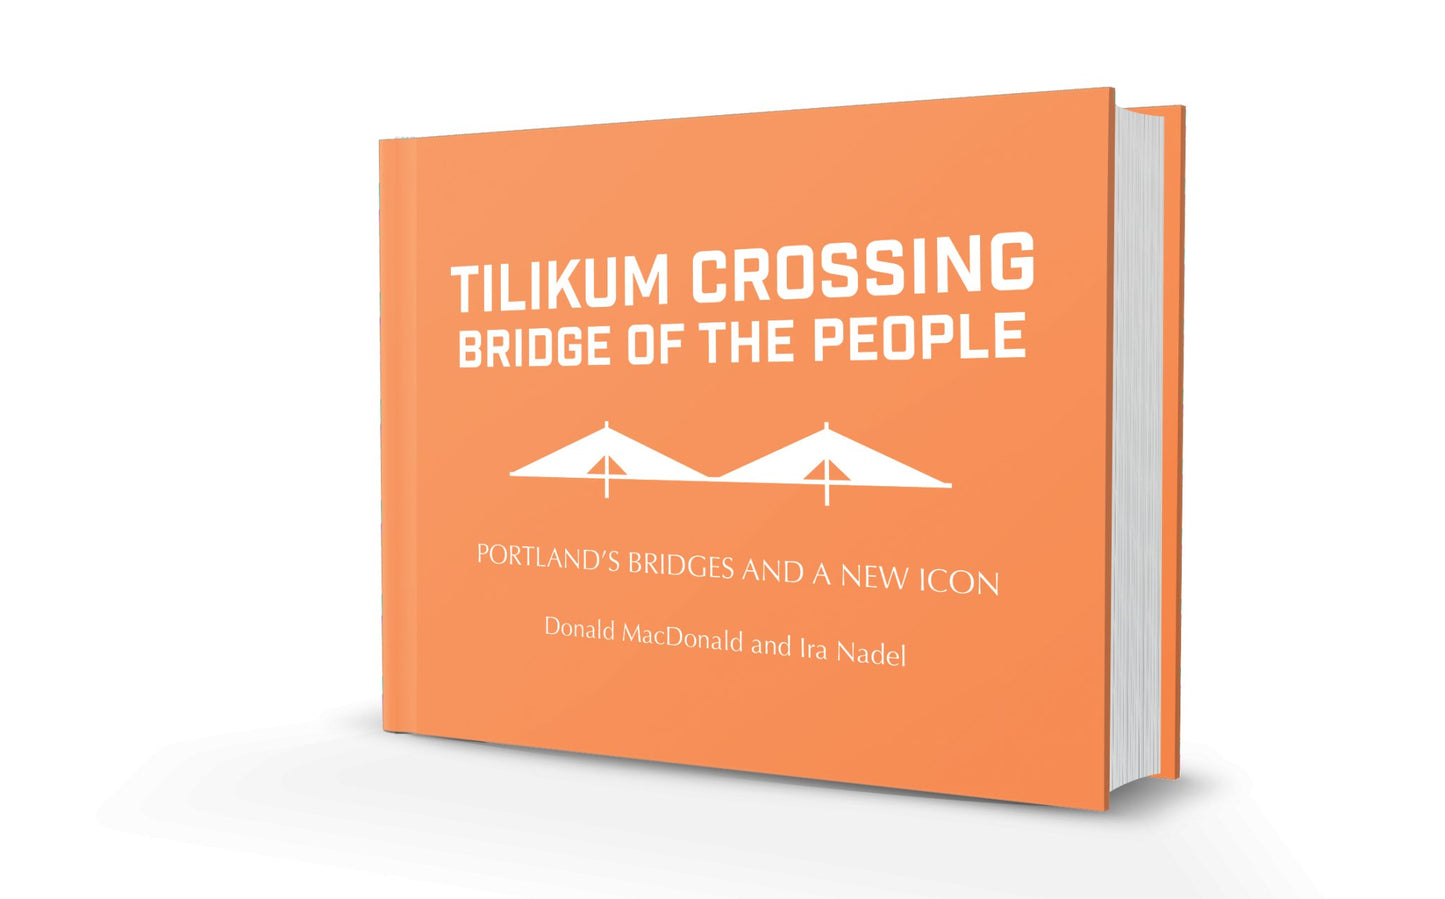 Tilikum Crossing Bridge of the People: Portland's Bridges and a New Icon by Donald MacDonald Book Cover